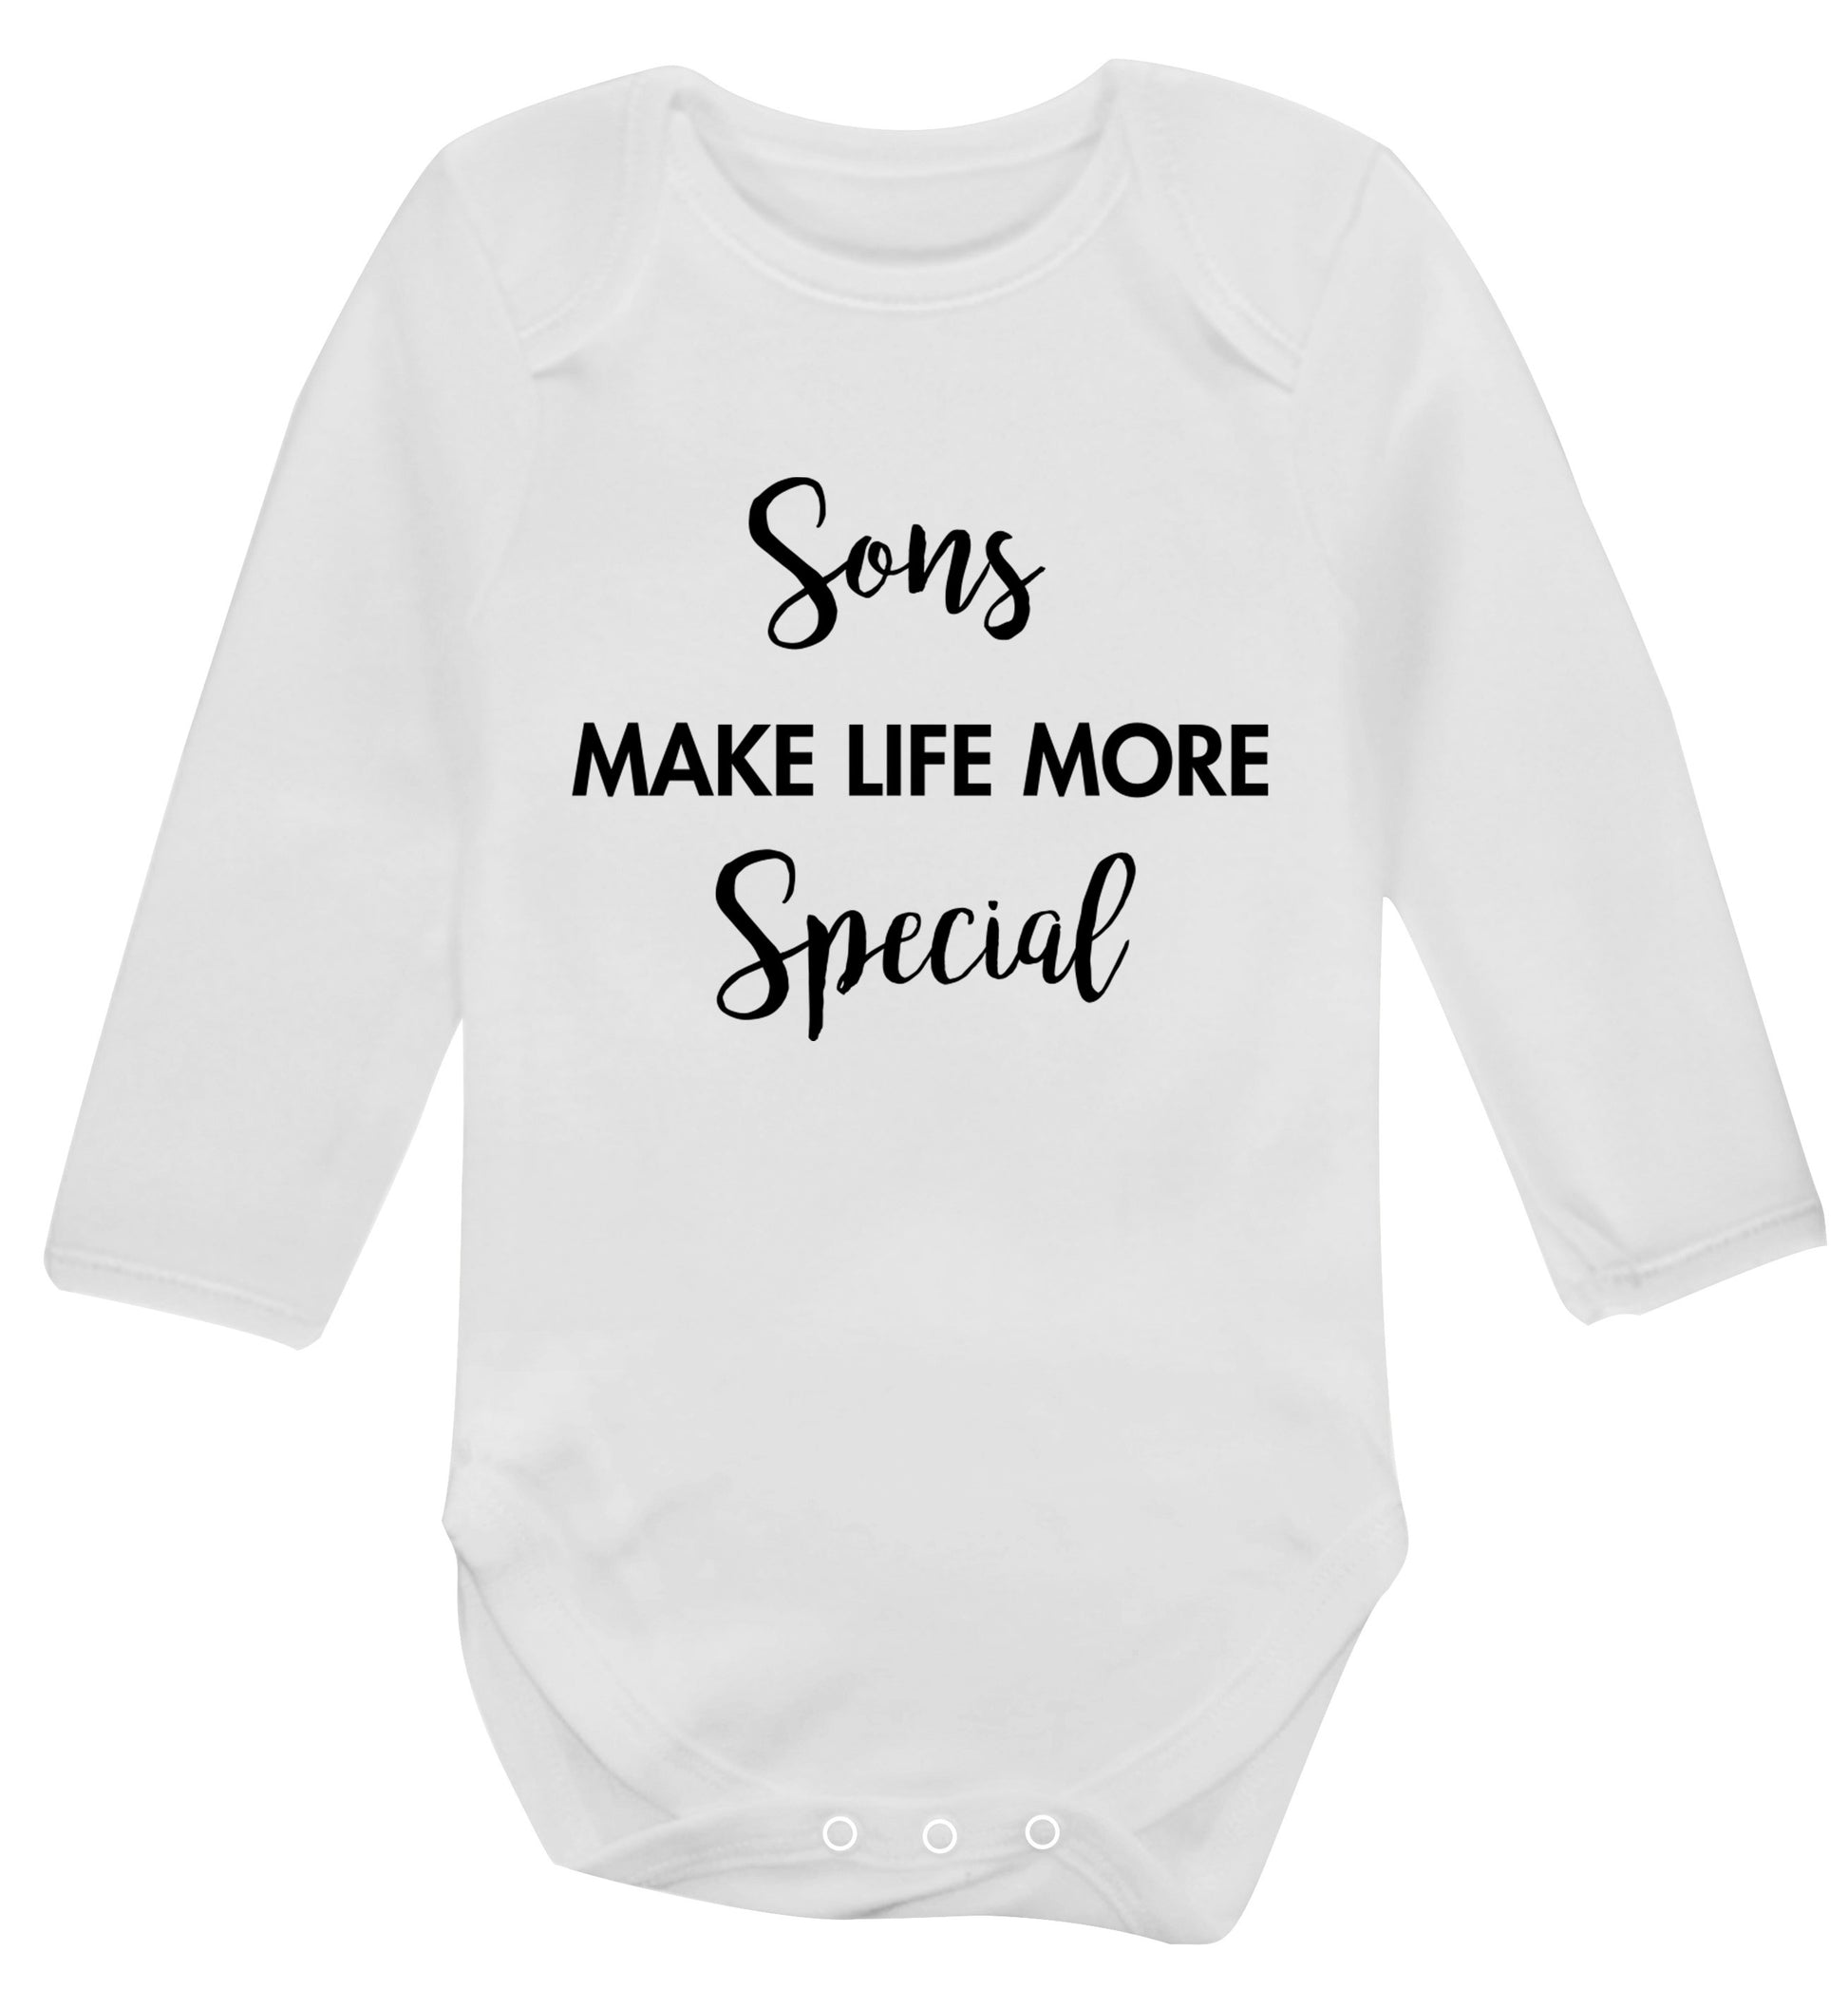 Daughters make life more special Baby Vest long sleeved white 6-12 months